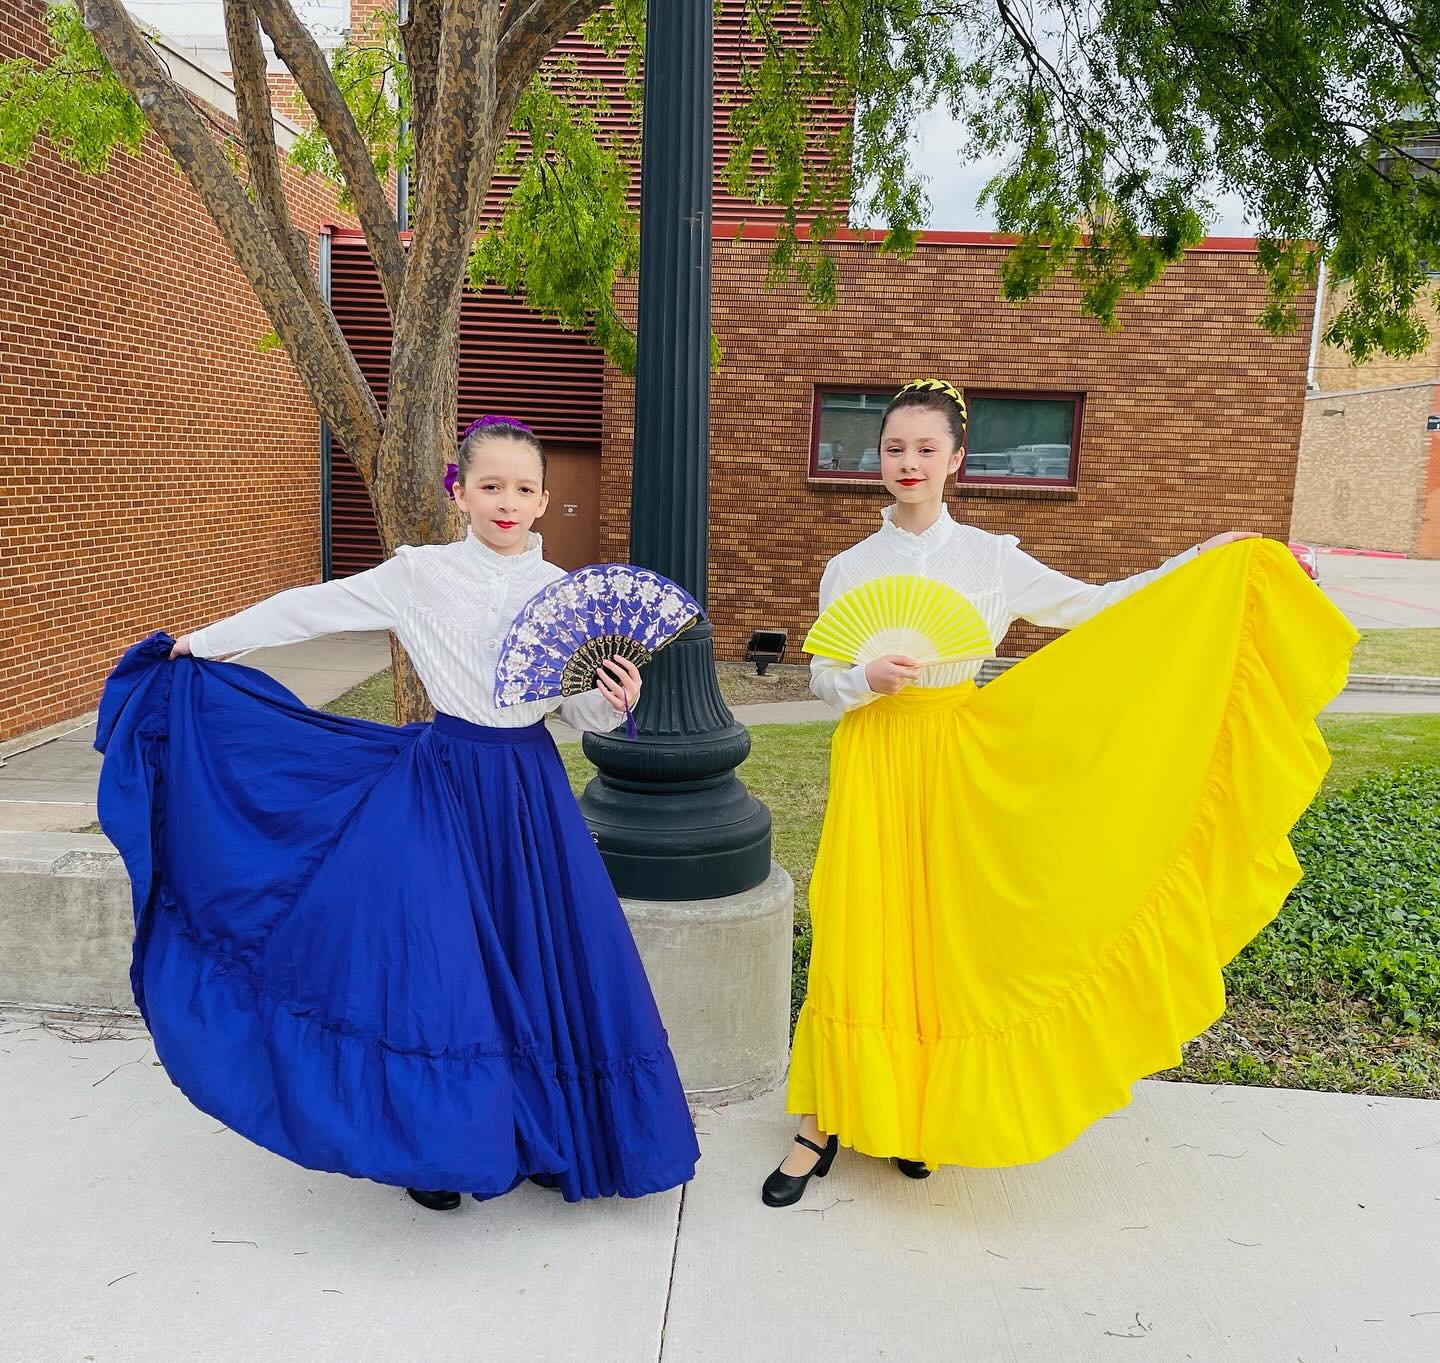 First performance for our MDS Folklorico dancers! Beautiful job, ladies! 💛 💜

#passionartistrydance #discovertheartistwithin #allendancestudio #mckinneydancestudio #friscodancestudio #thedancestudionetwork